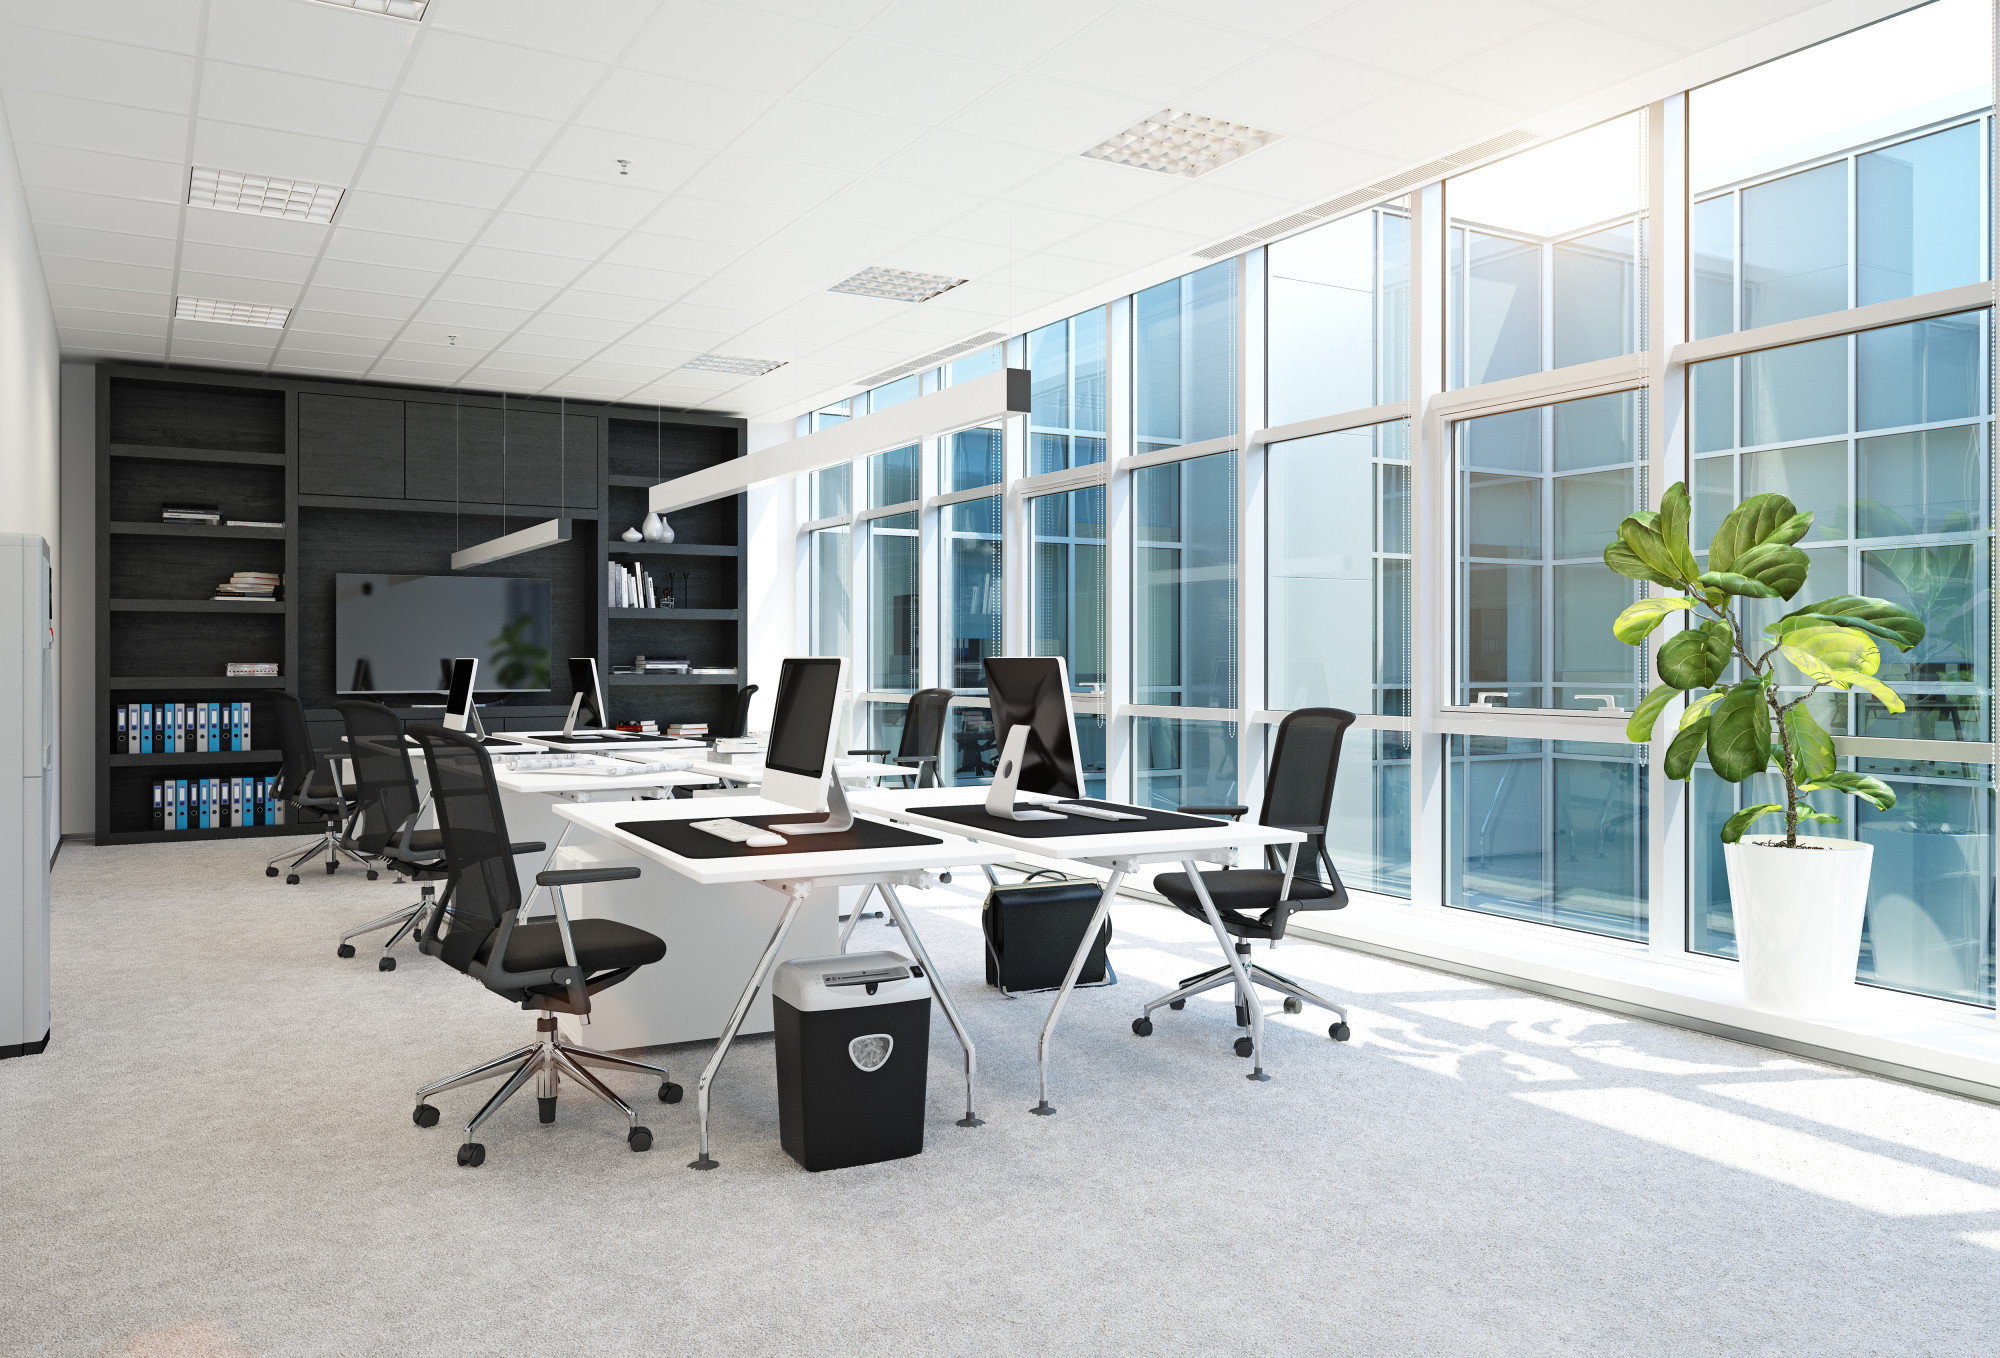 How to Find an Office Space for Rent That's Perfect for Your Company